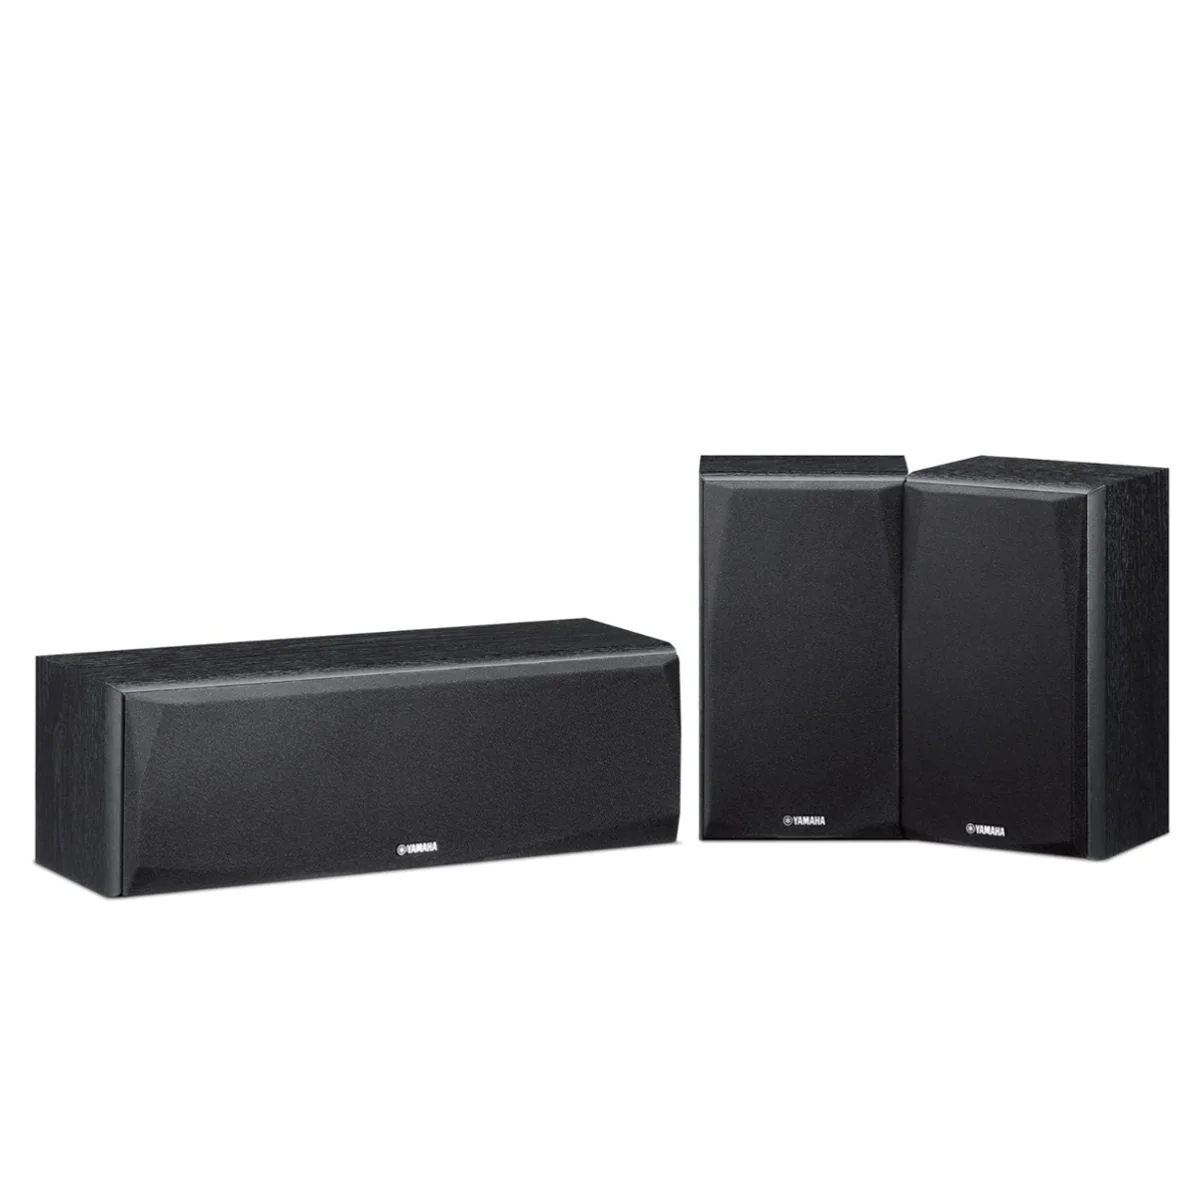 Yamaha_NS-P51_Home_Theater_Speaker_Package